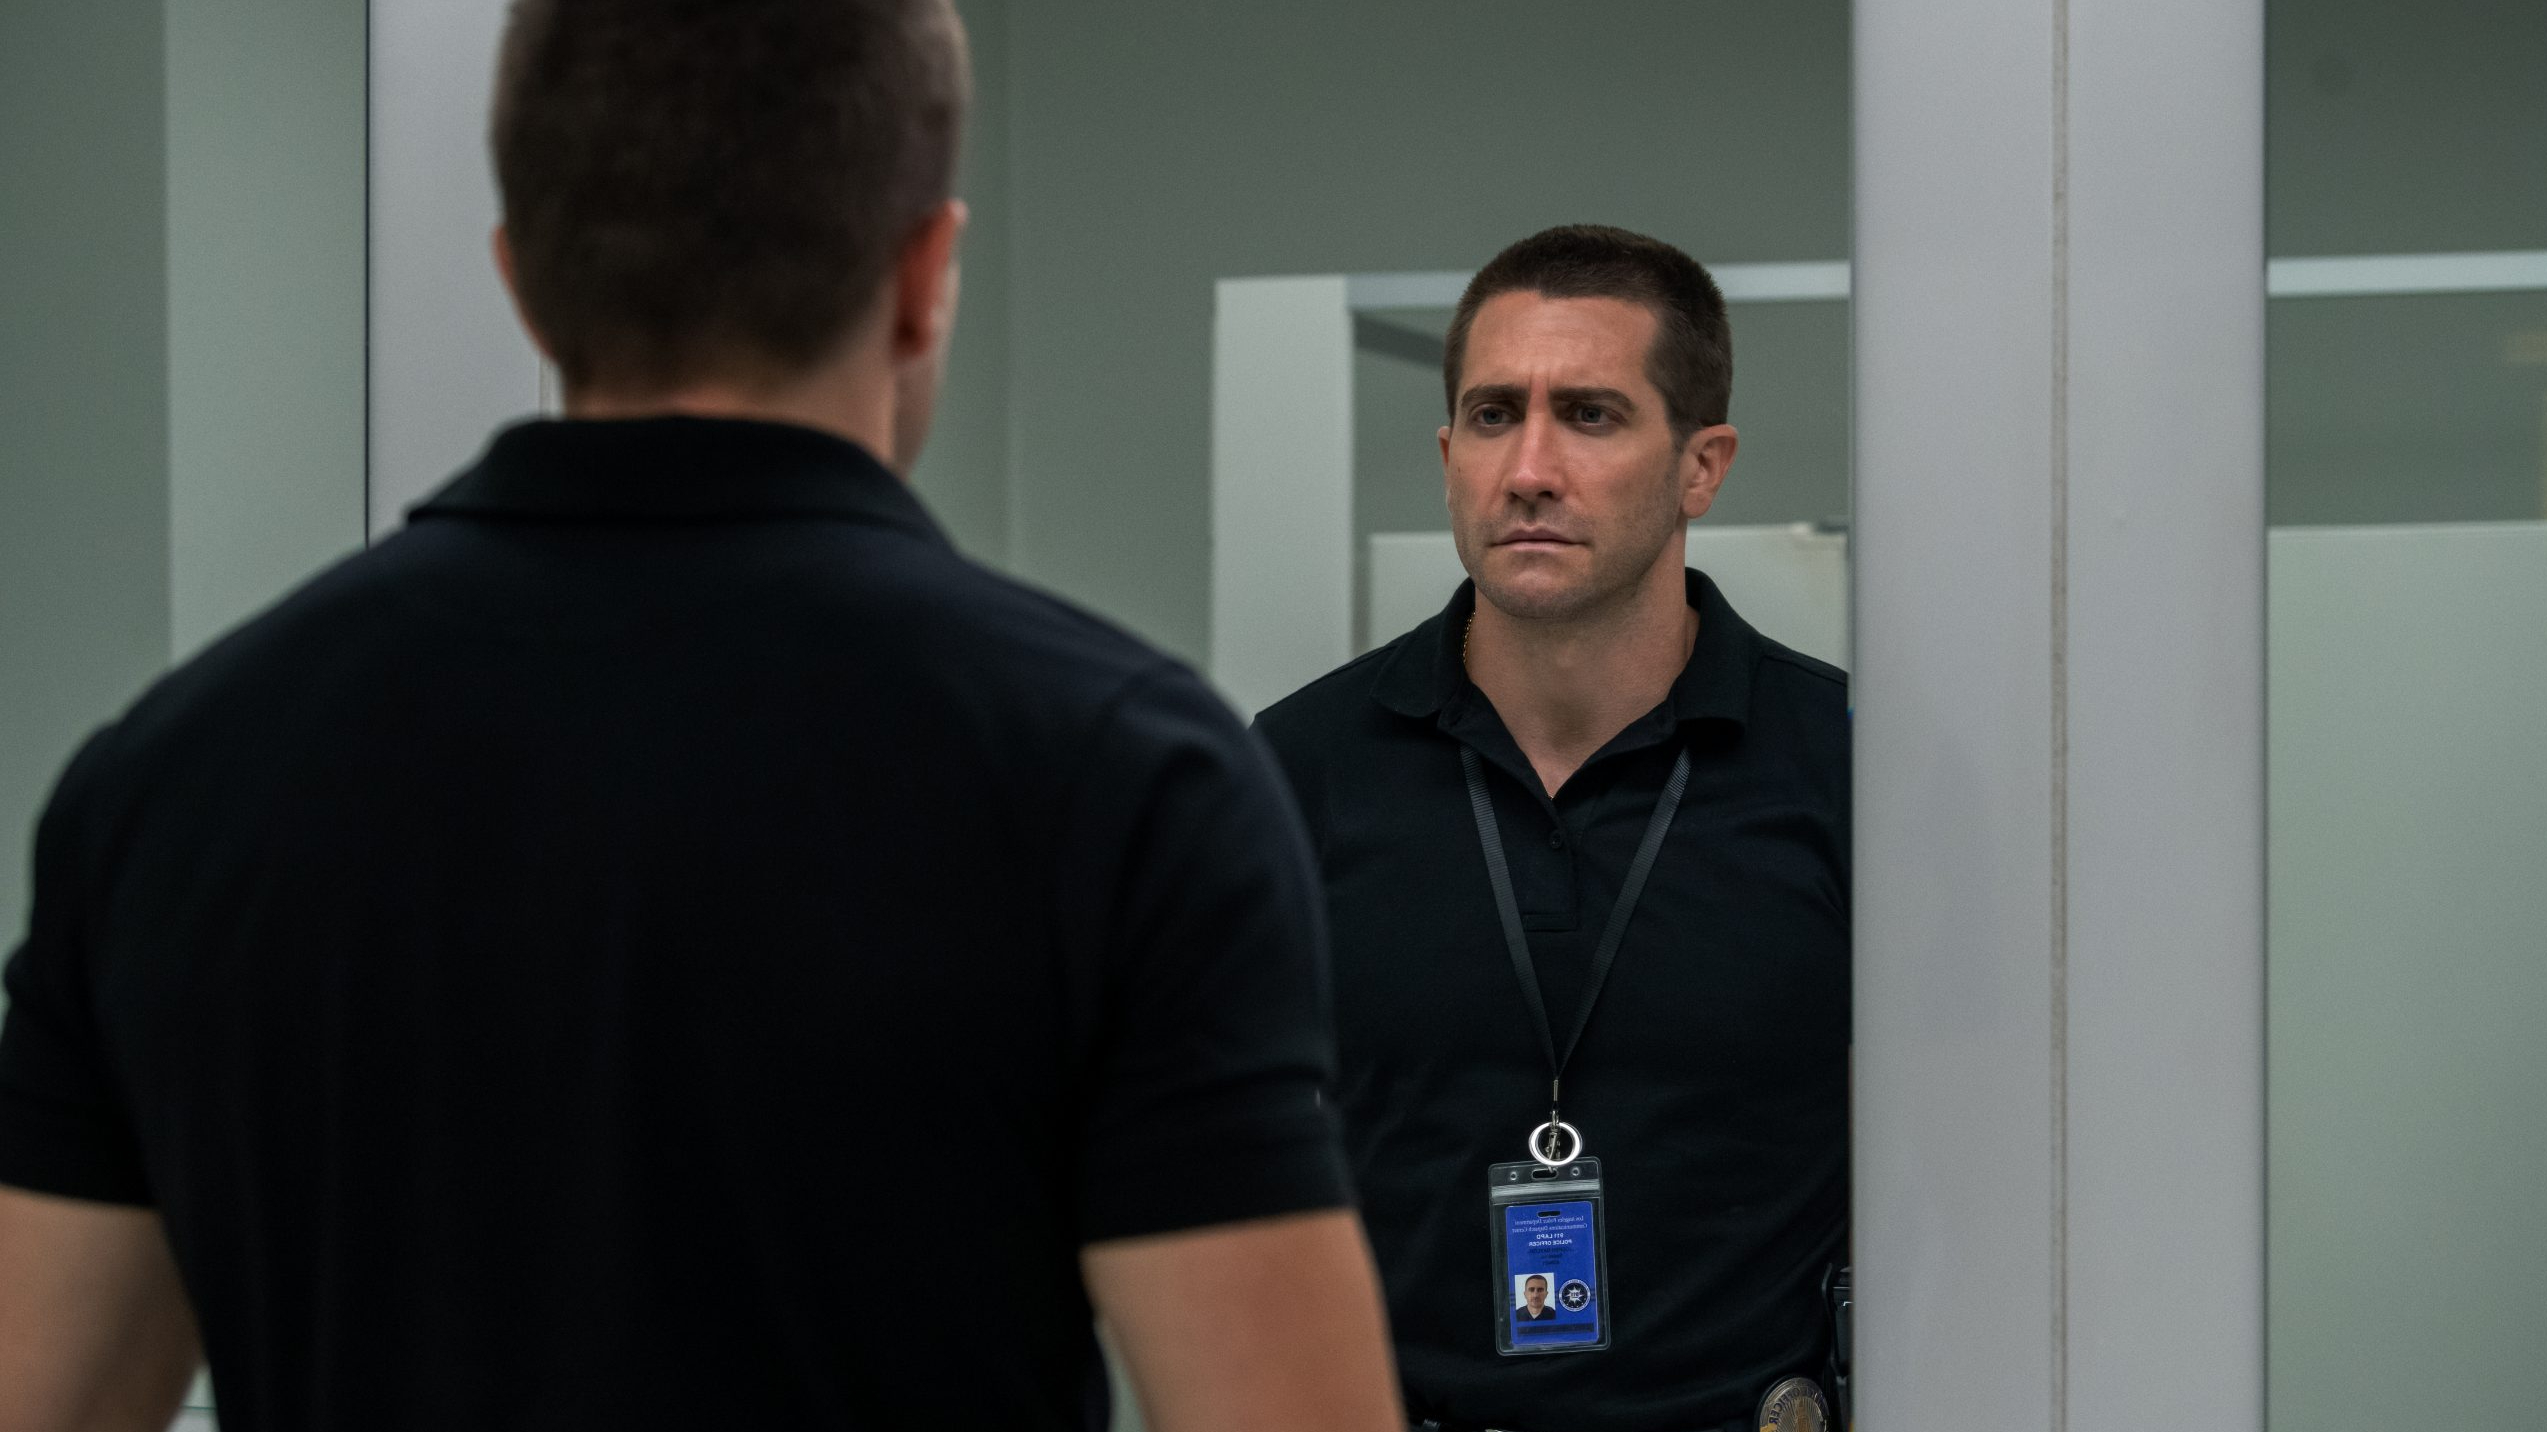 Jake Gyllenhaal questions his morale in the mirror while wearing his 911 operator badge as seen in THE GUILTY directed by Antoine Fuqua. 